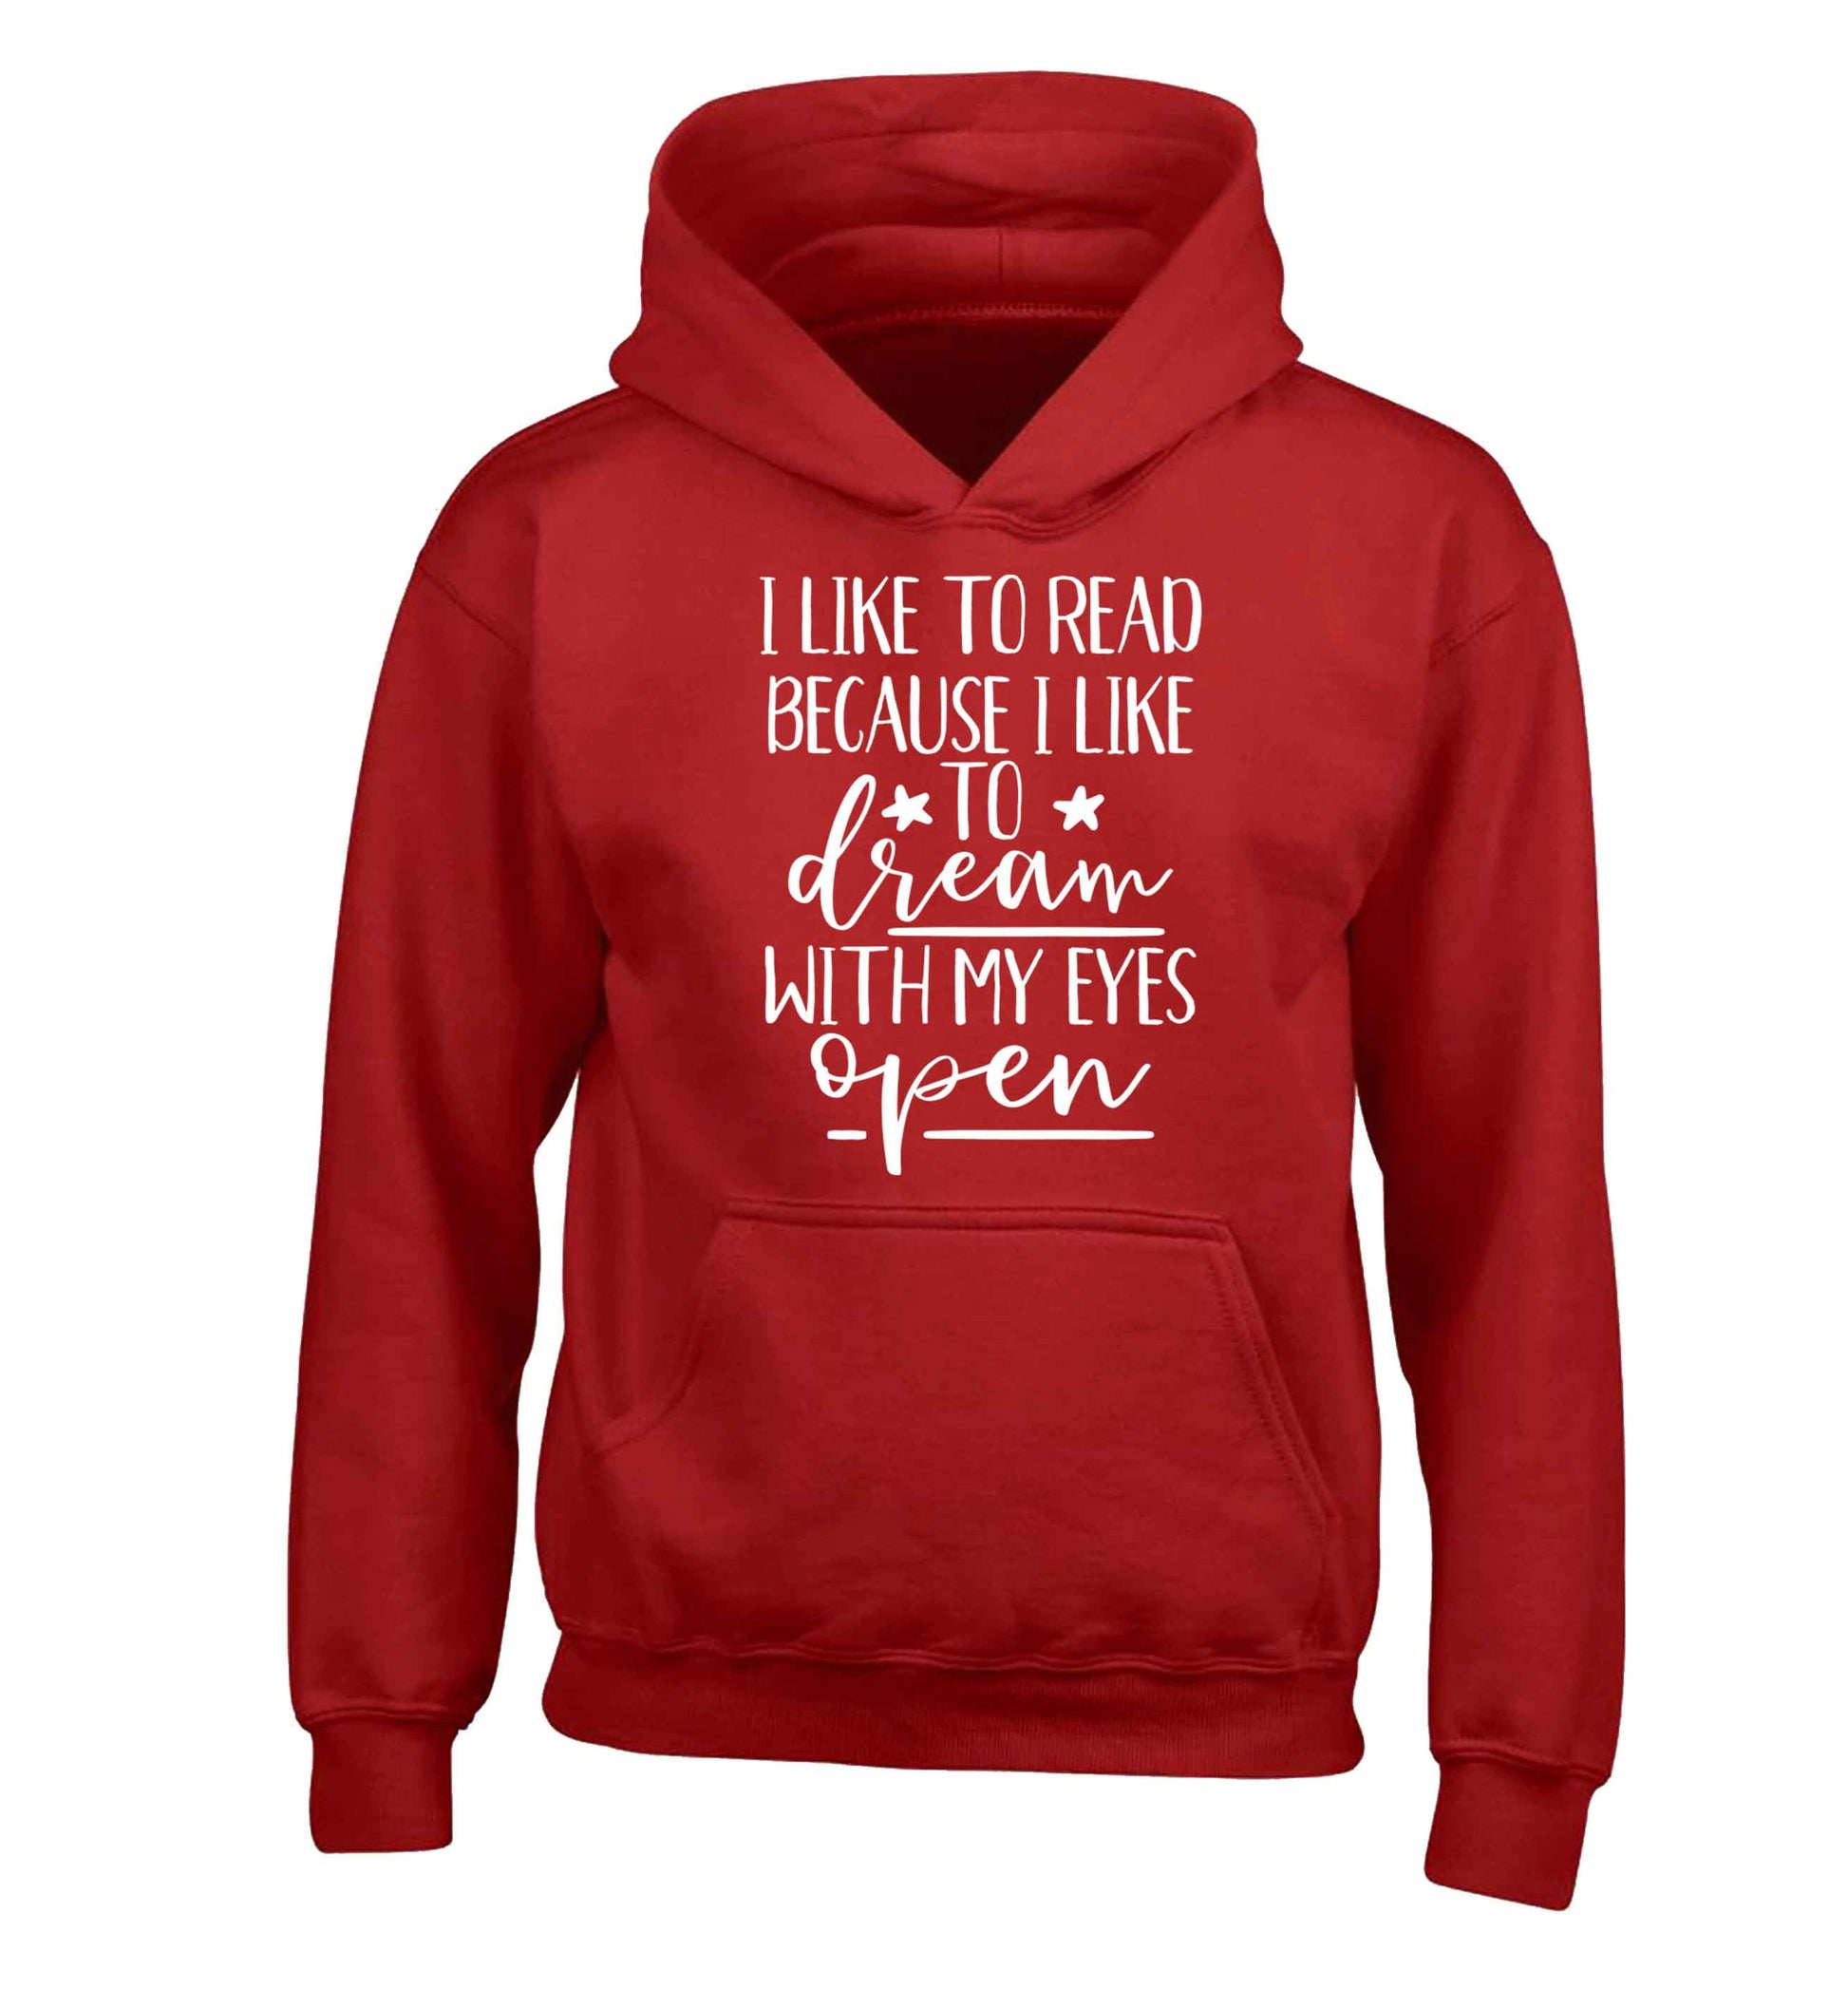 I like to read because I like to dream with my eyes open children's red hoodie 12-13 Years